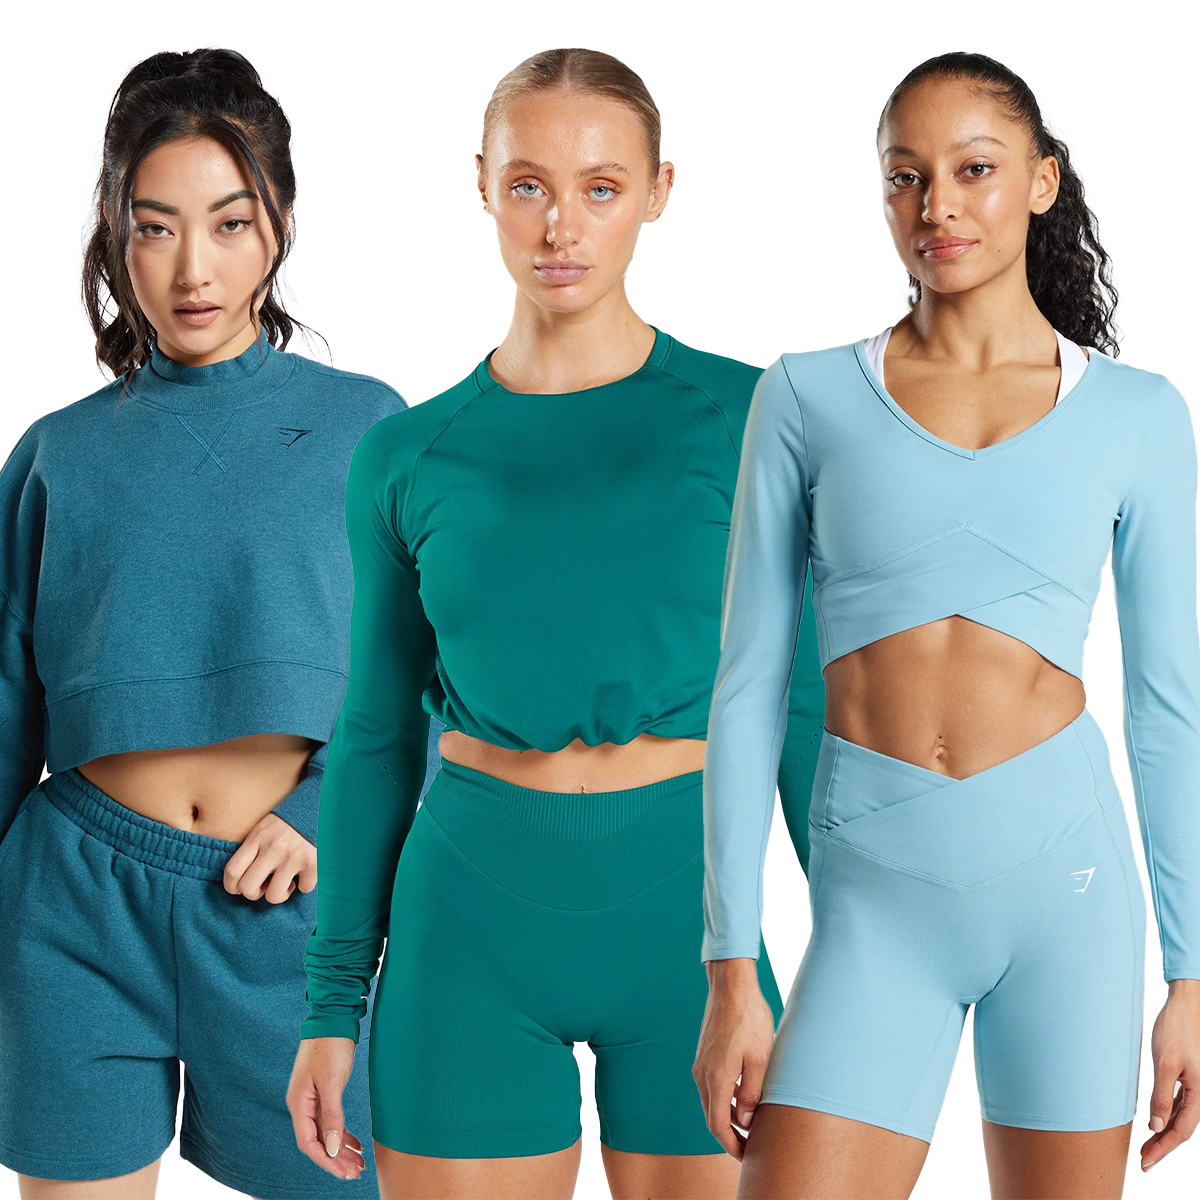 Gymshark launches a sale with up to 50 percent off gym wear